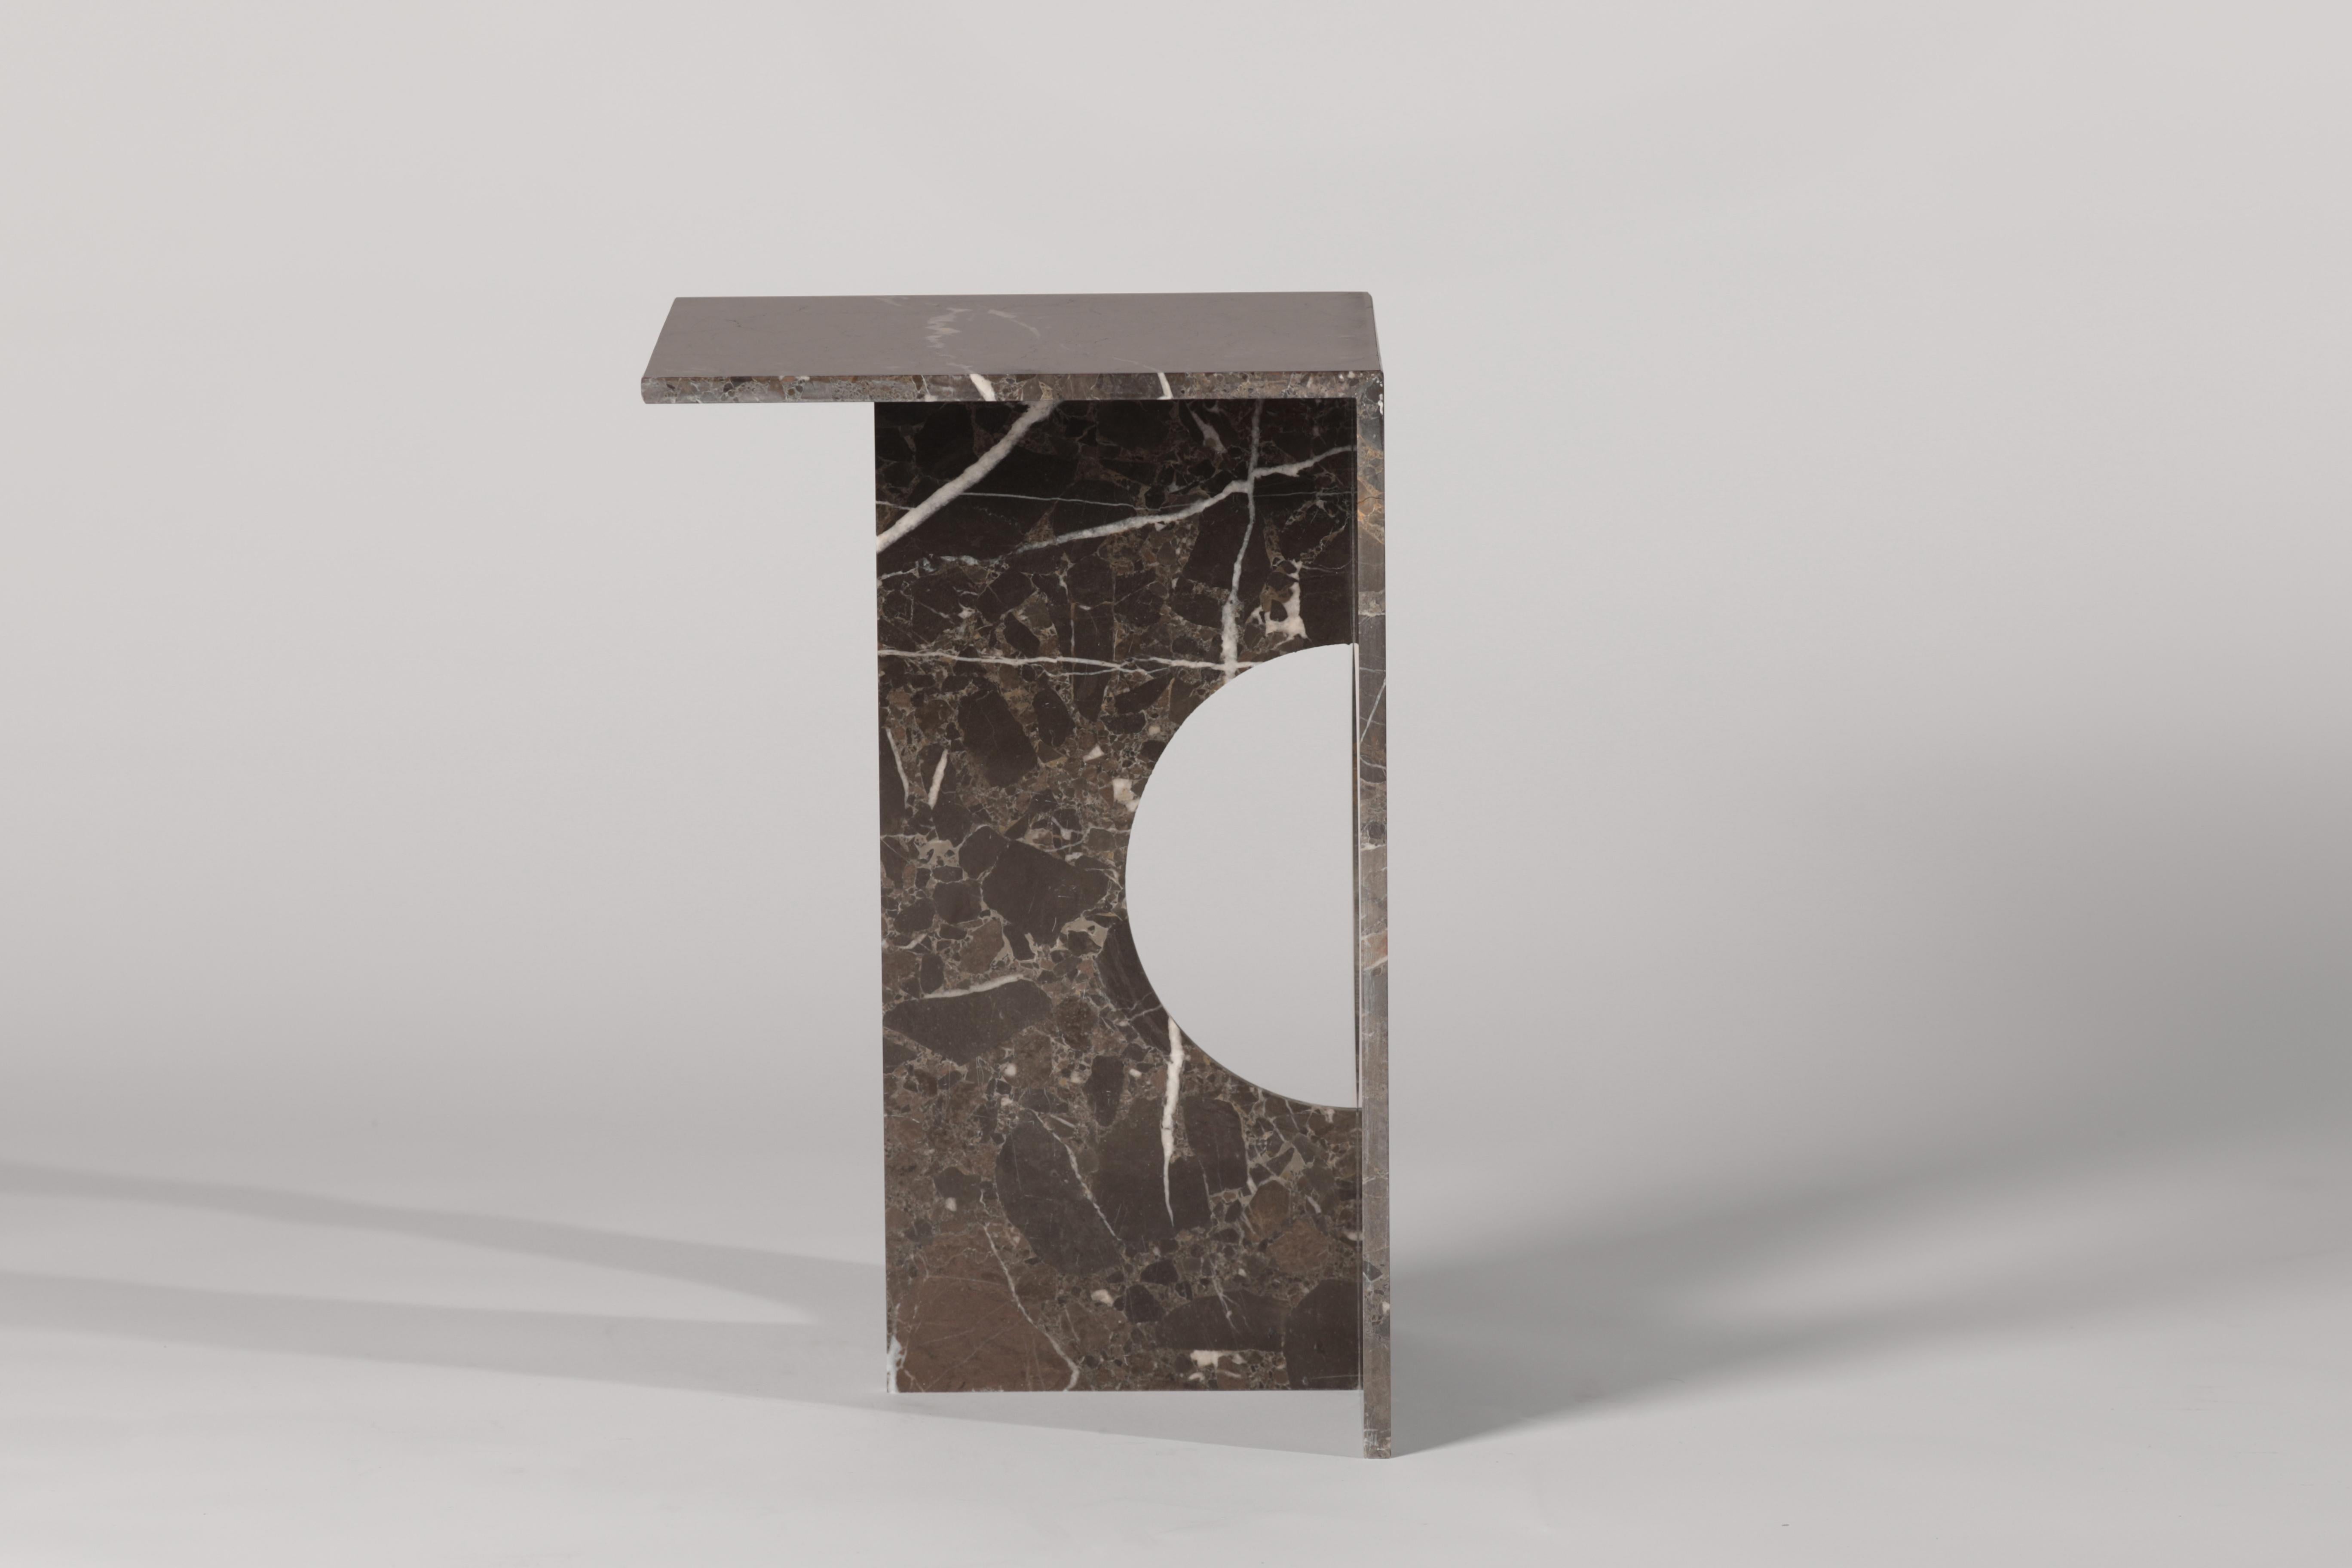 A side table made entirely from marble makes this piece like a modern sculpture. Ola side table can be made from diffferent marbles or green diabase stone if required. Perfection of machine cut blends with handmade touches at the finishes in this